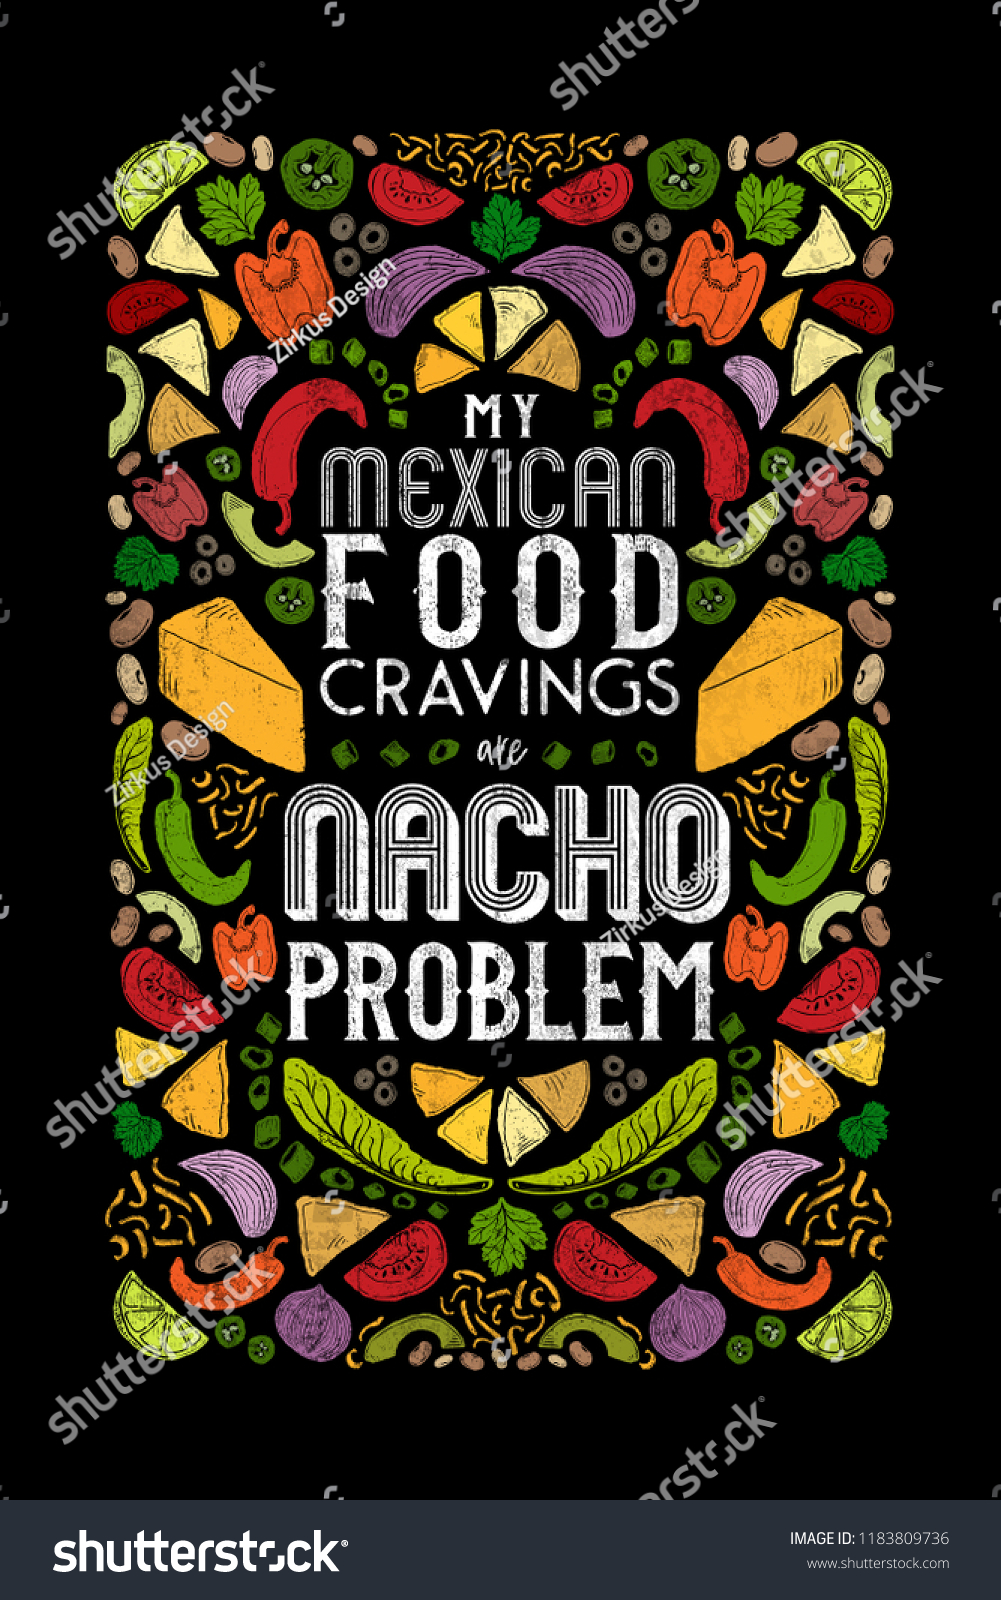 Royalty Free Stock Illustration Of My Mexican Food Cravings Nacho